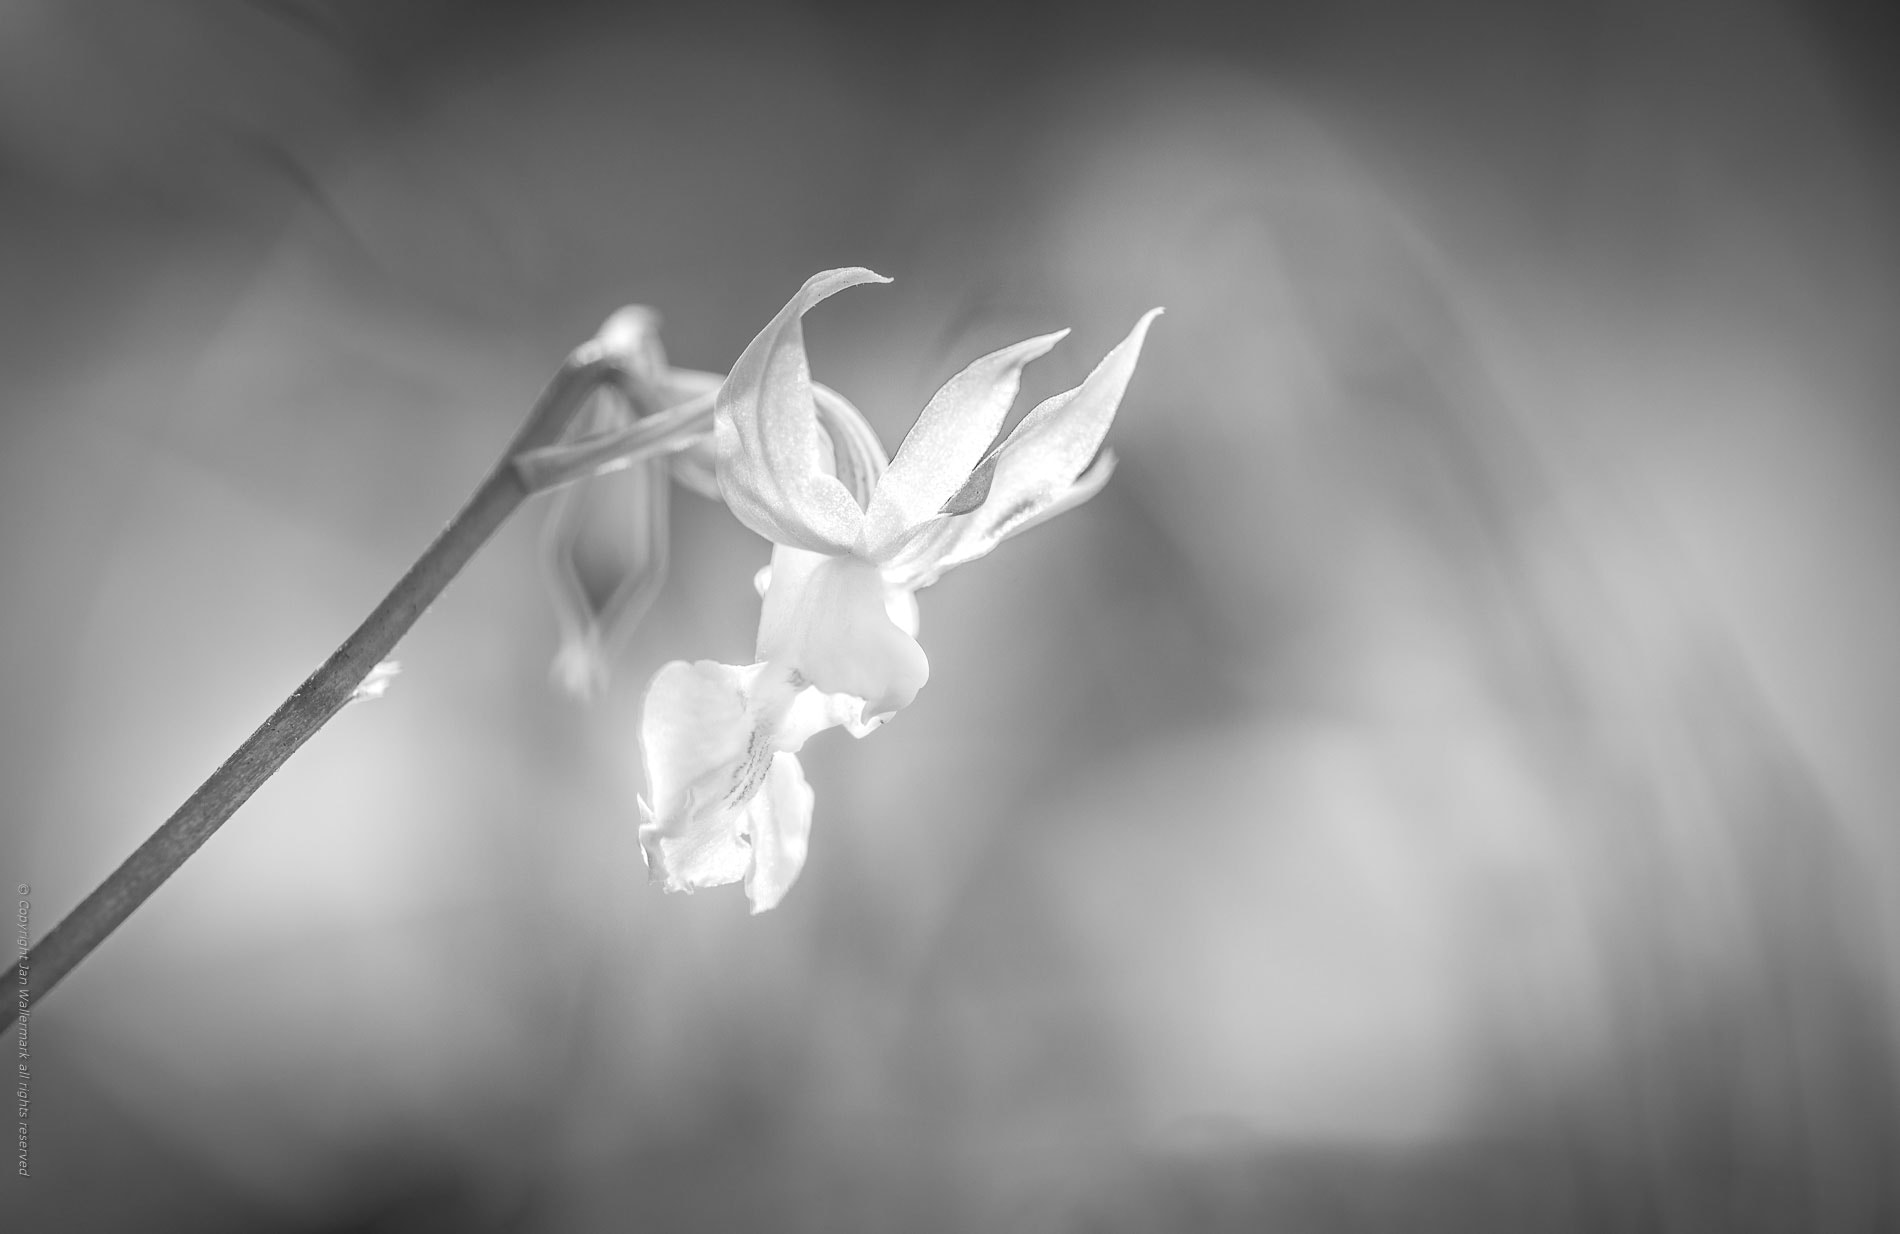 Nikon D800E sample photo. A hommage to the orchid photography